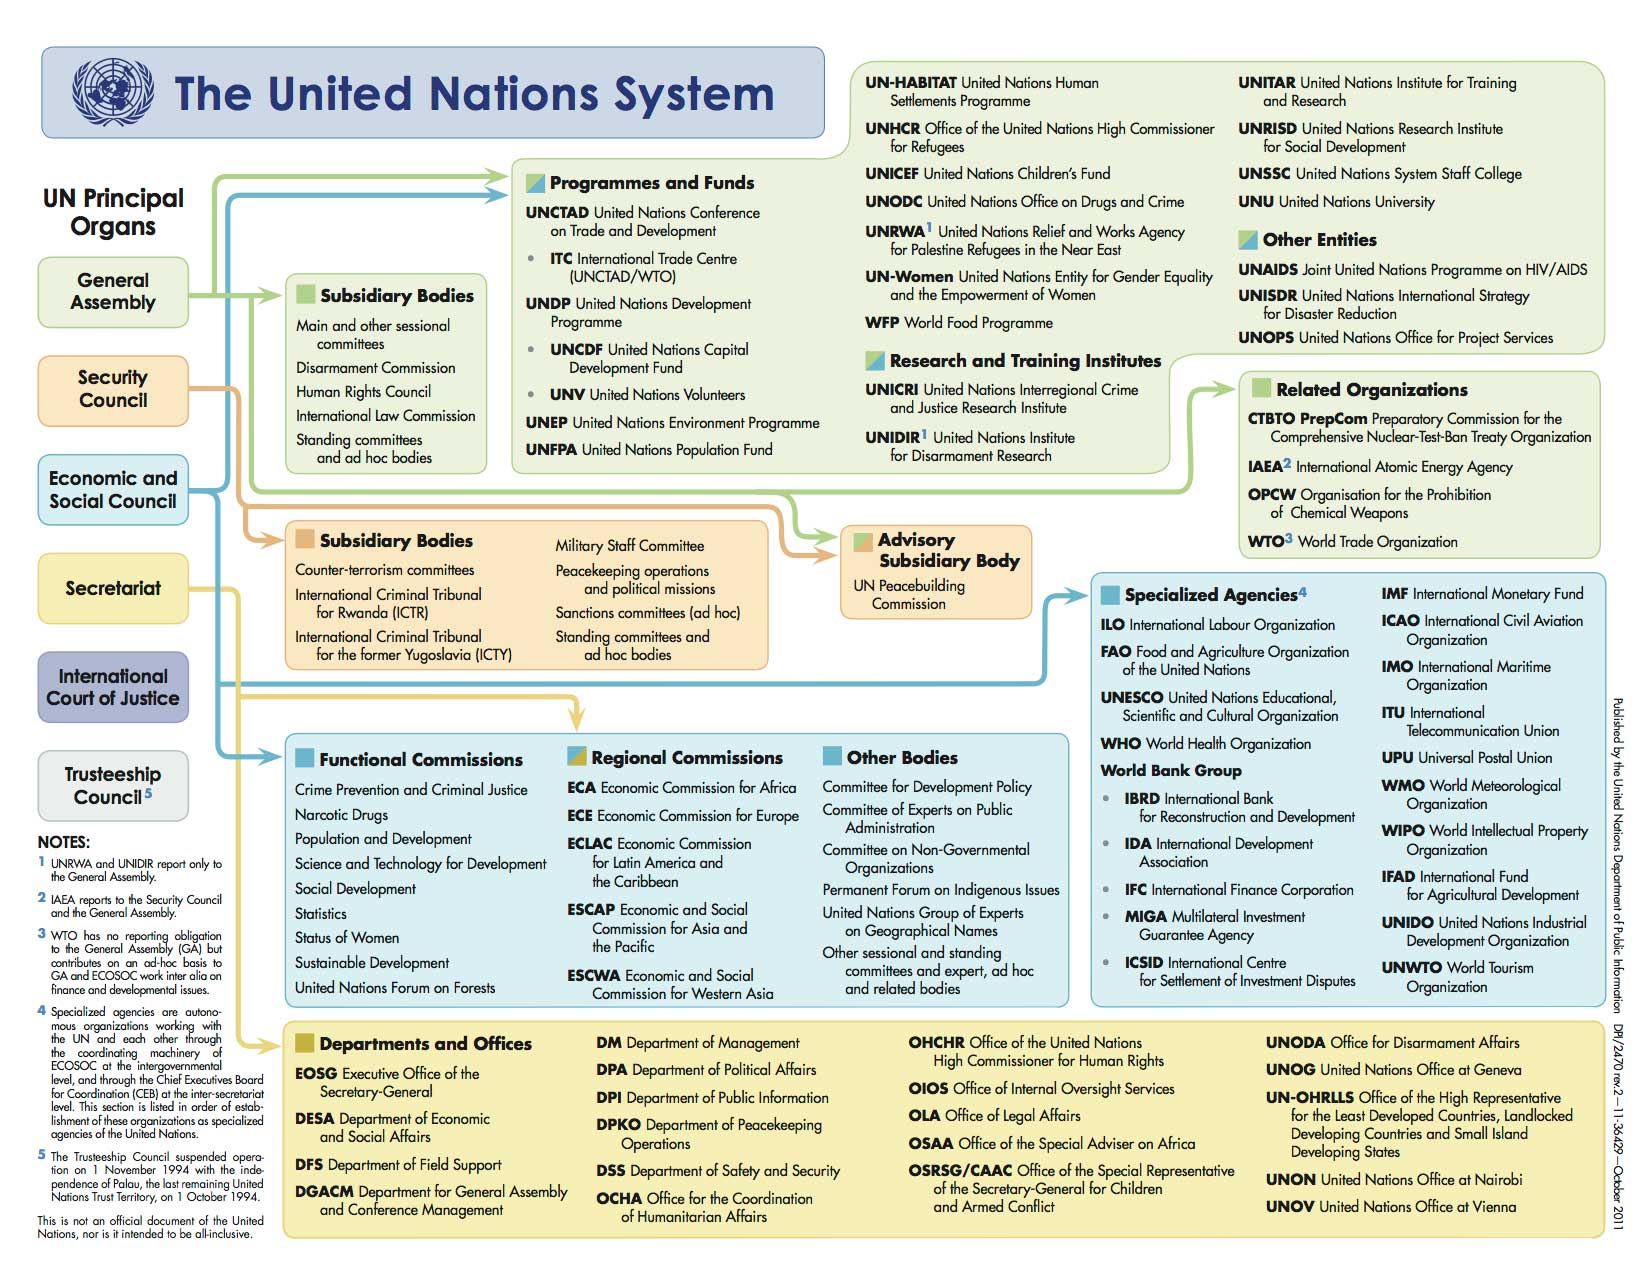 chart of the un systtem showing principal organs and organizations of the UN